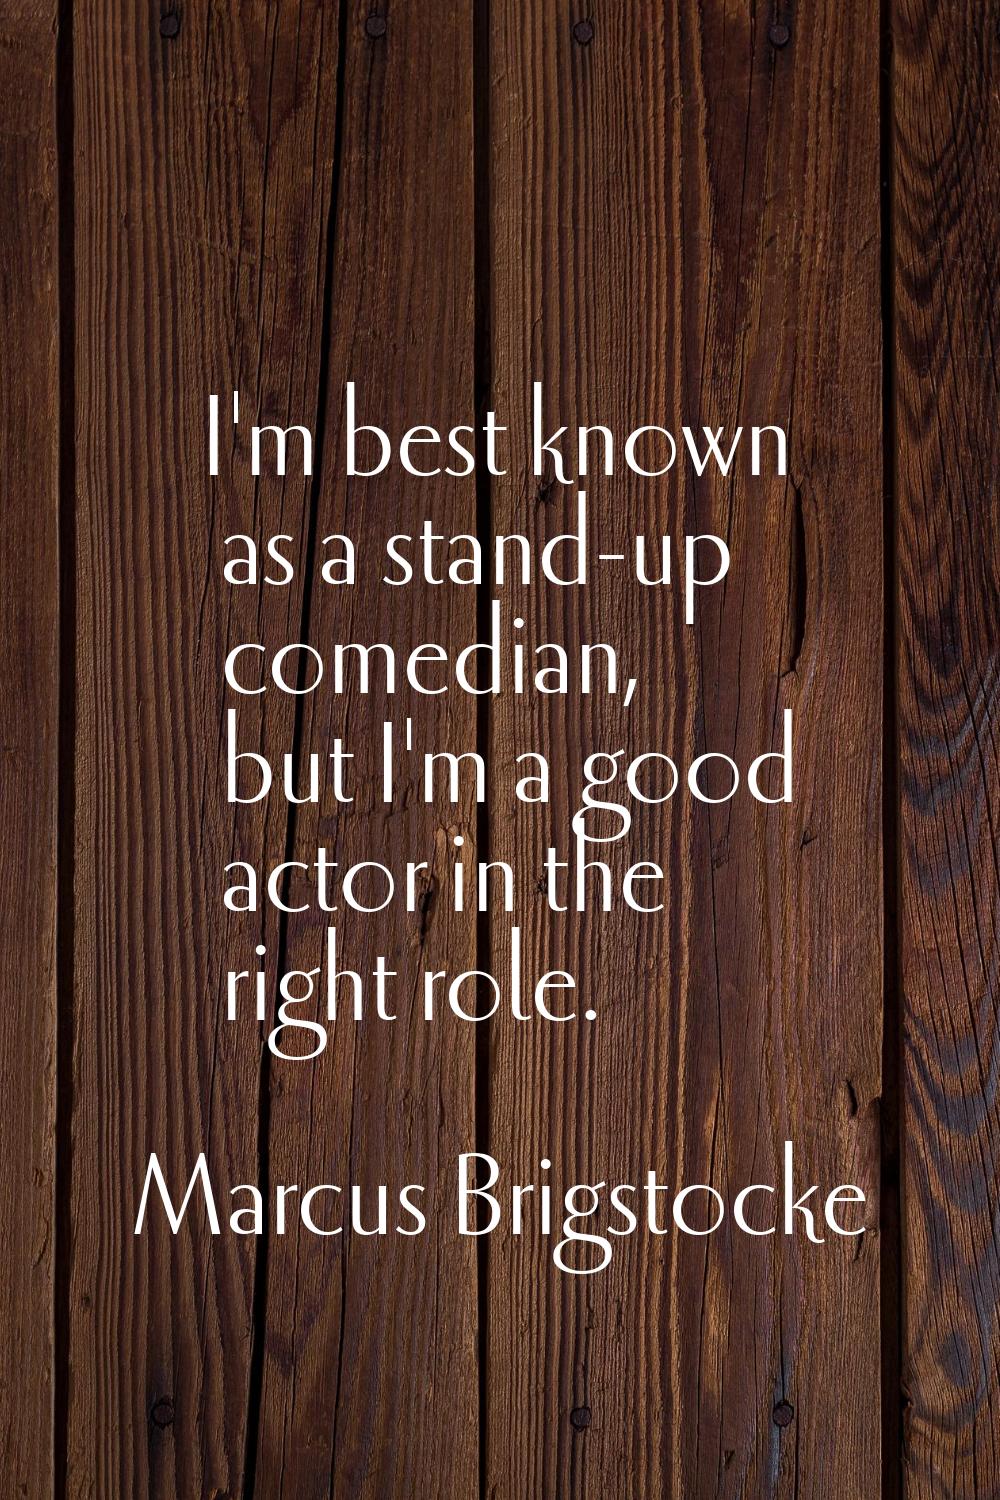 I'm best known as a stand-up comedian, but I'm a good actor in the right role.